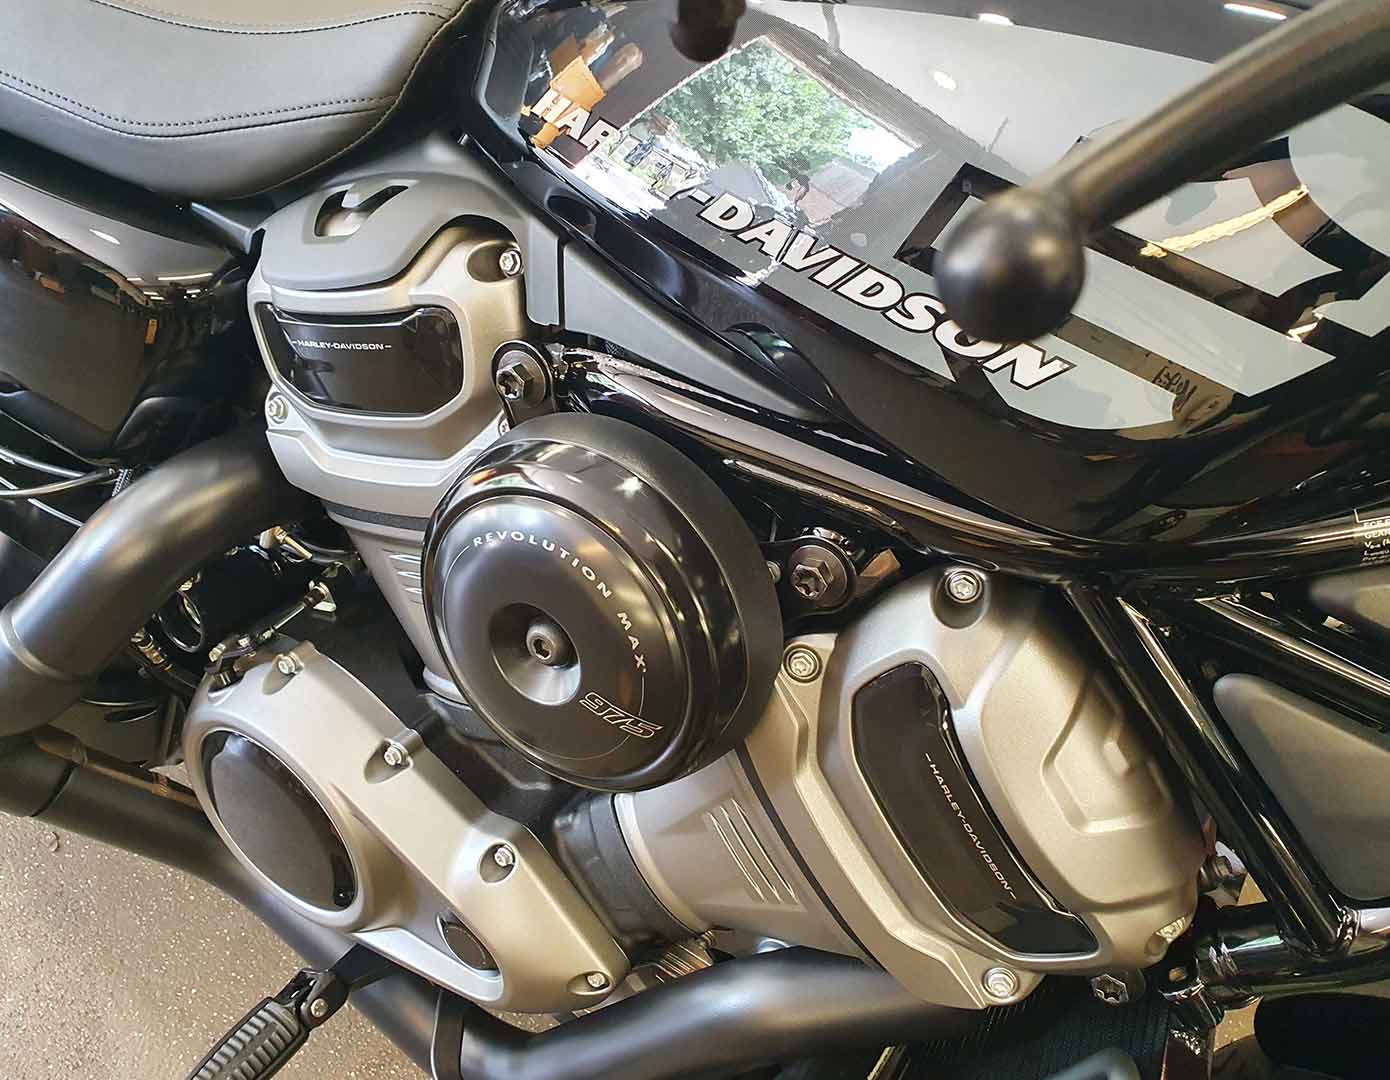 Engine photo up close on the Harley-Davidson Nightster